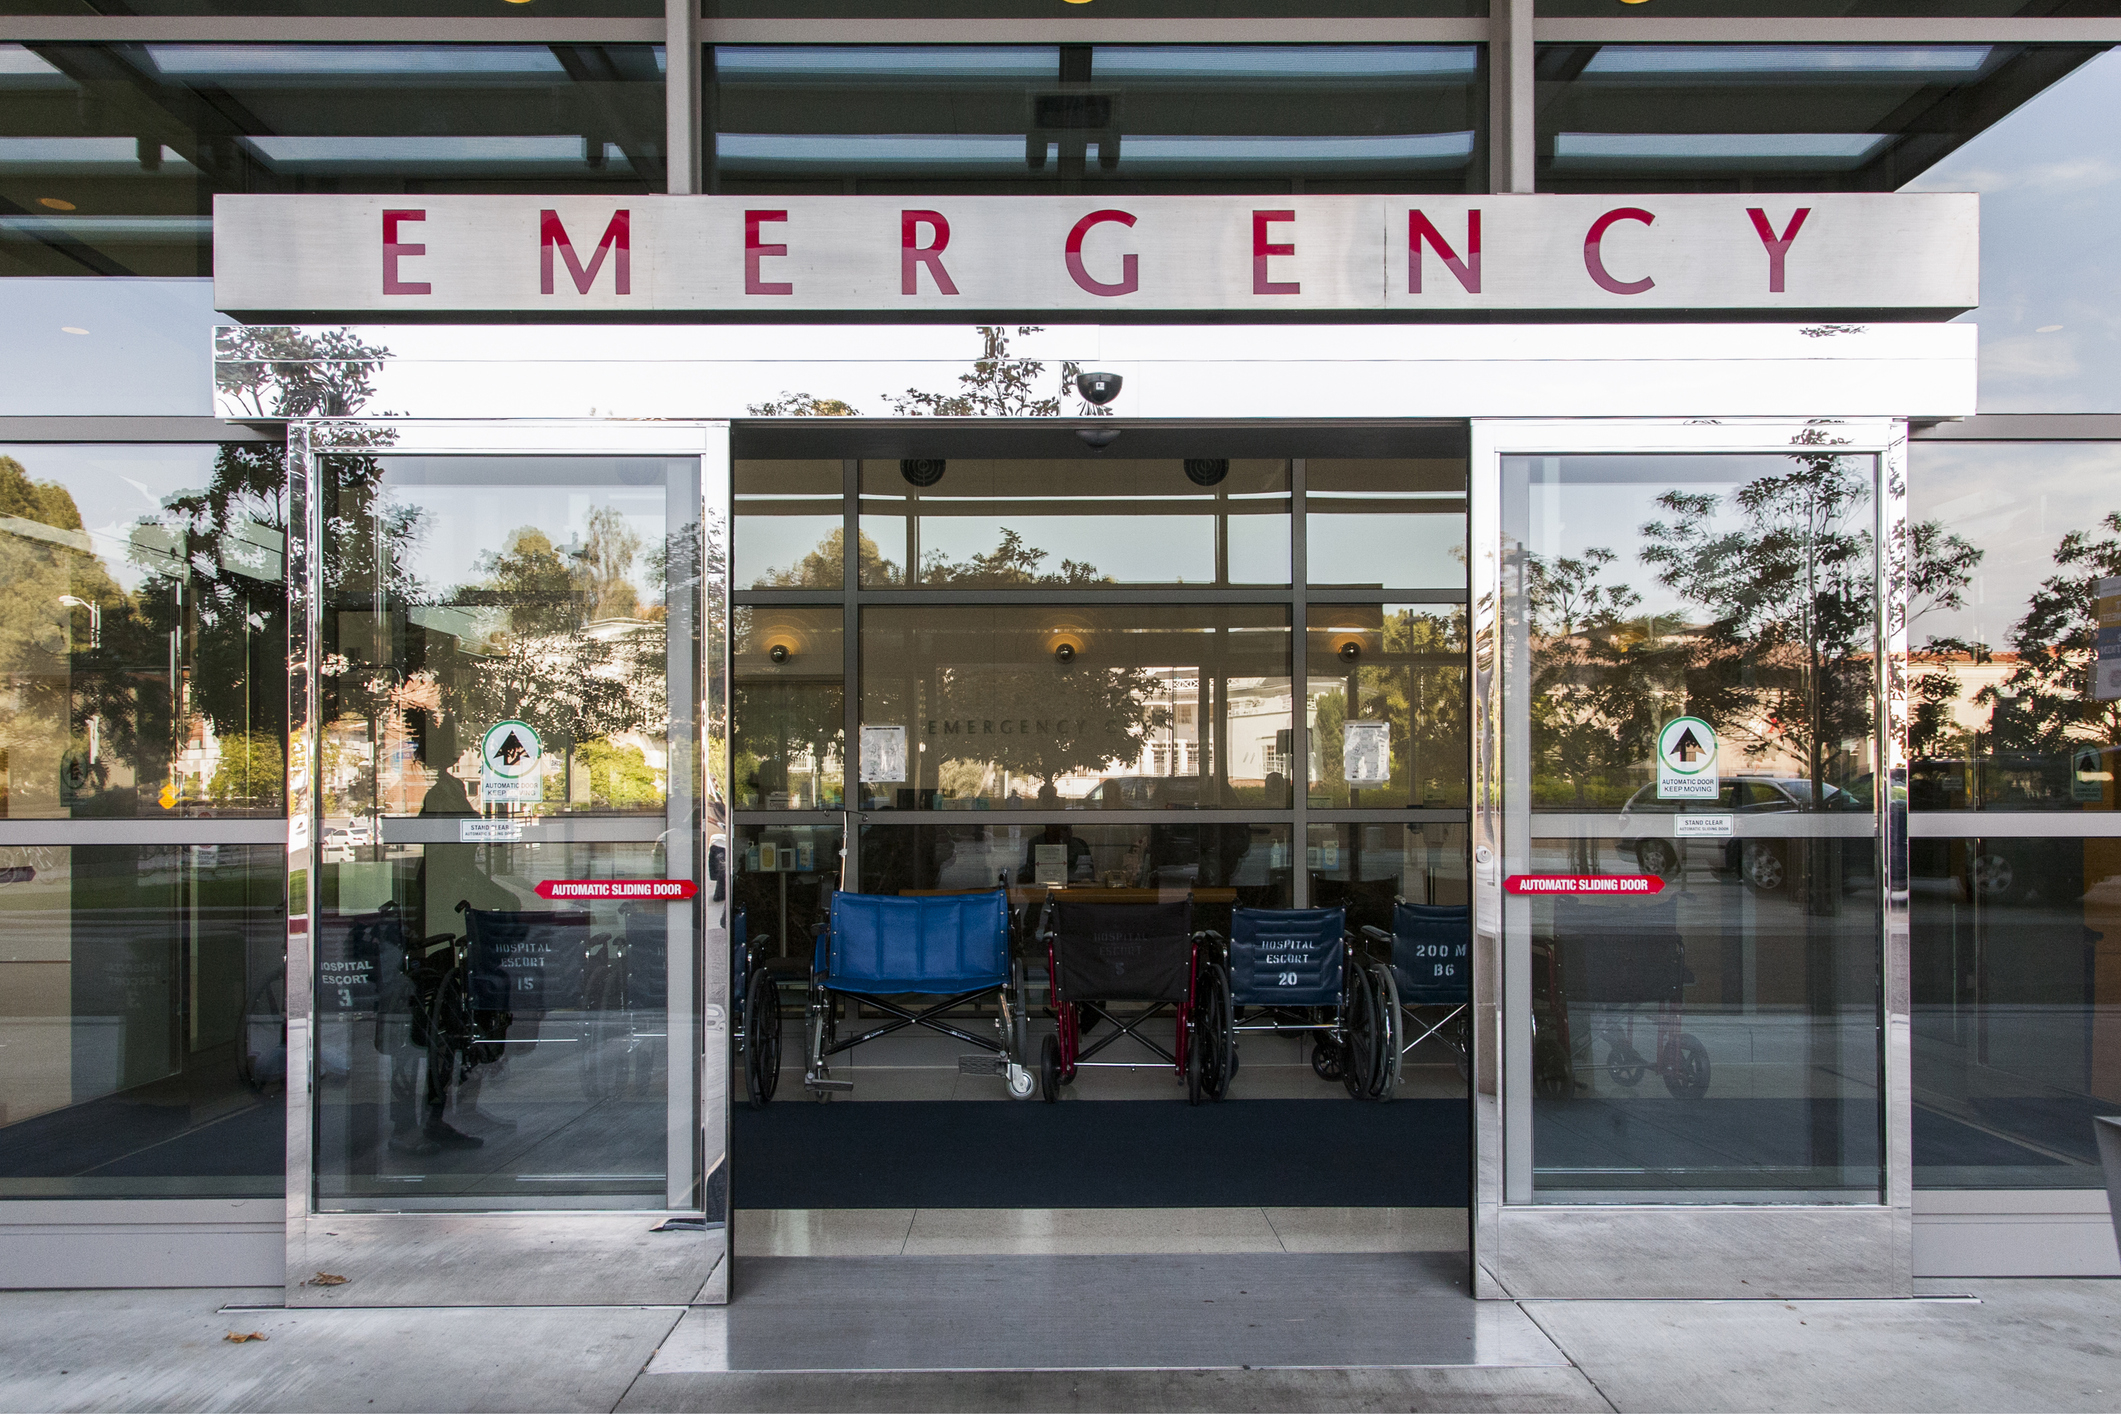 Emergency hospital entrance with a wheelchair and a stretcher visible